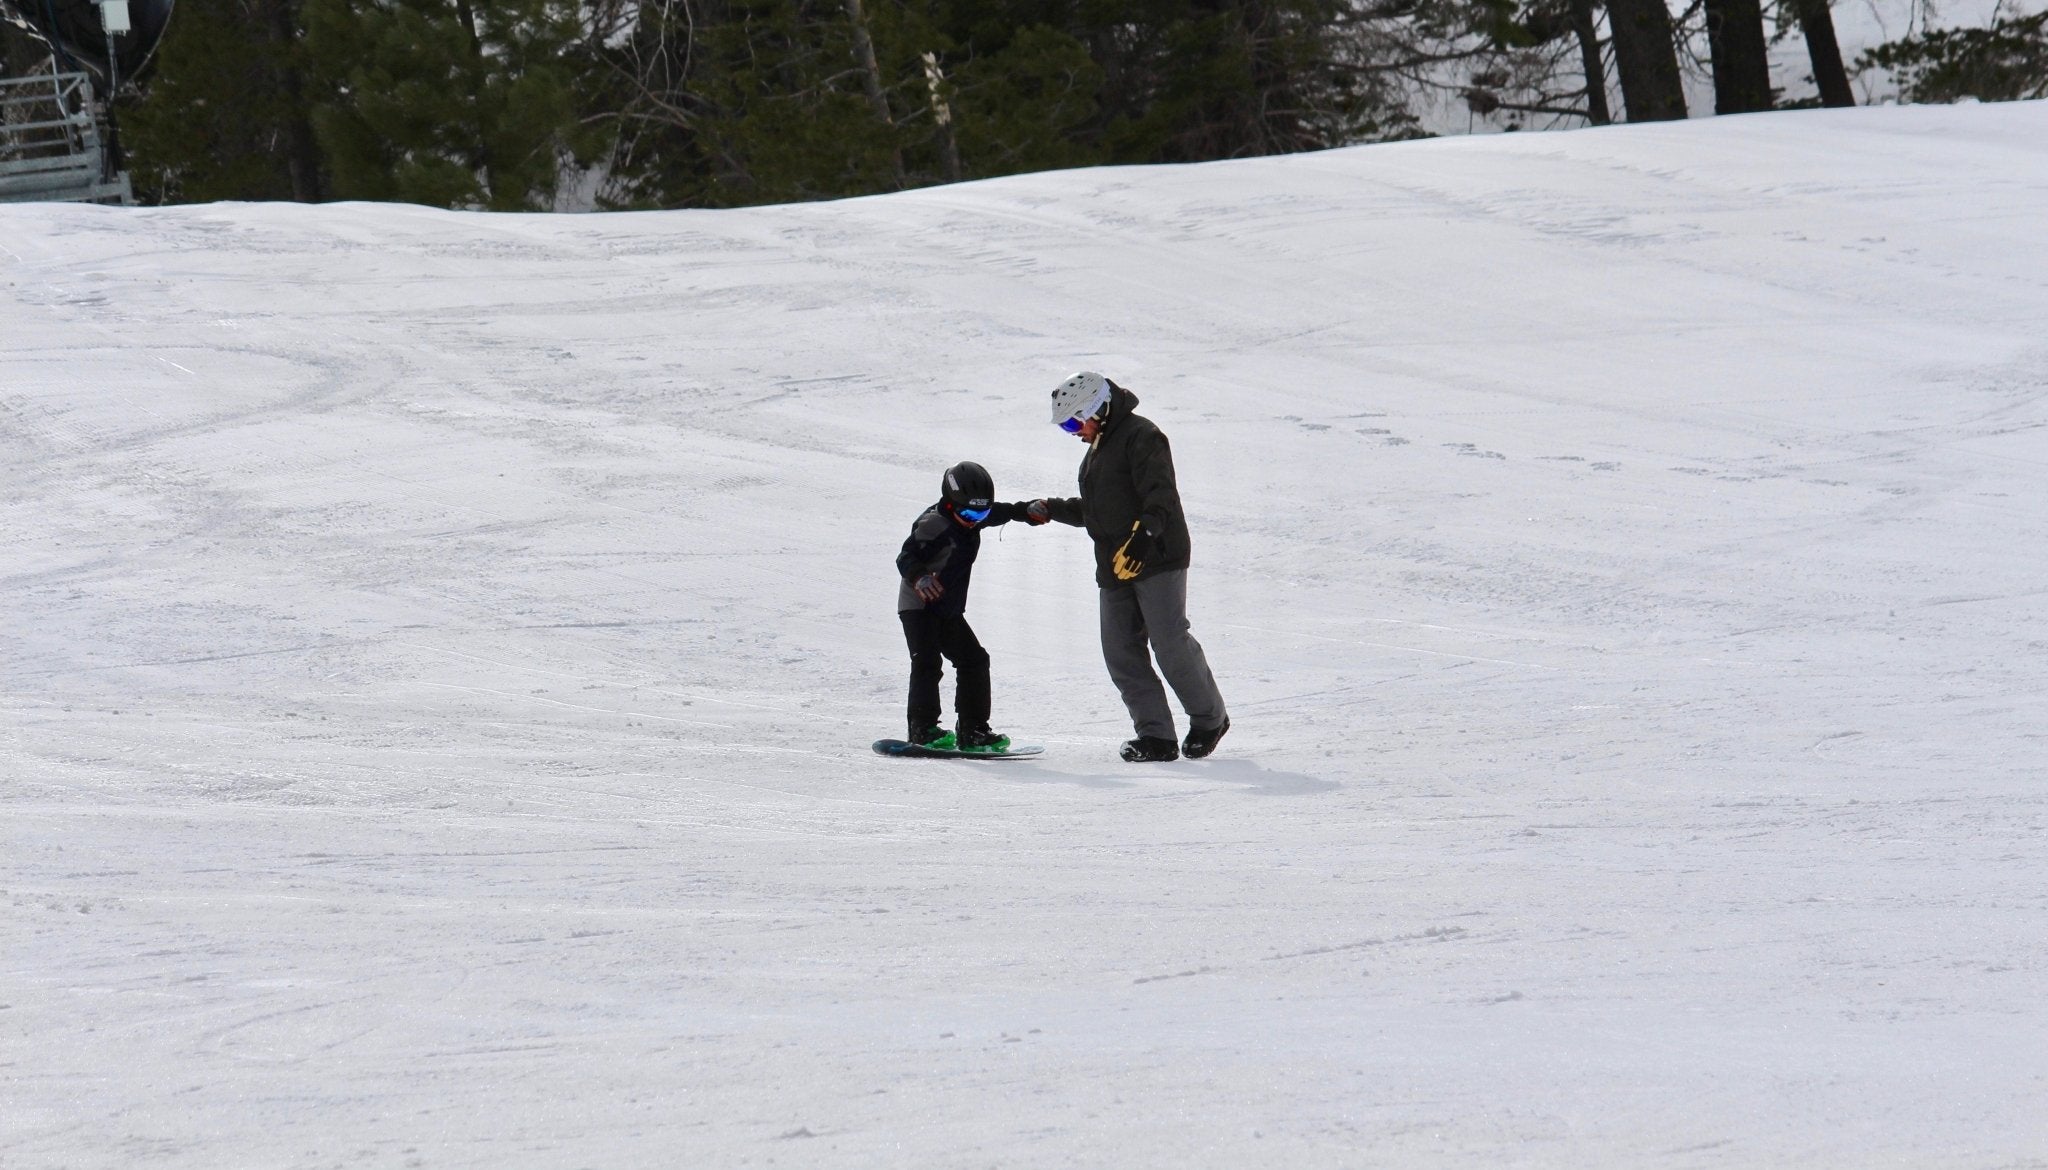 7 Tips for Teaching Kids to Ski or Snowboard